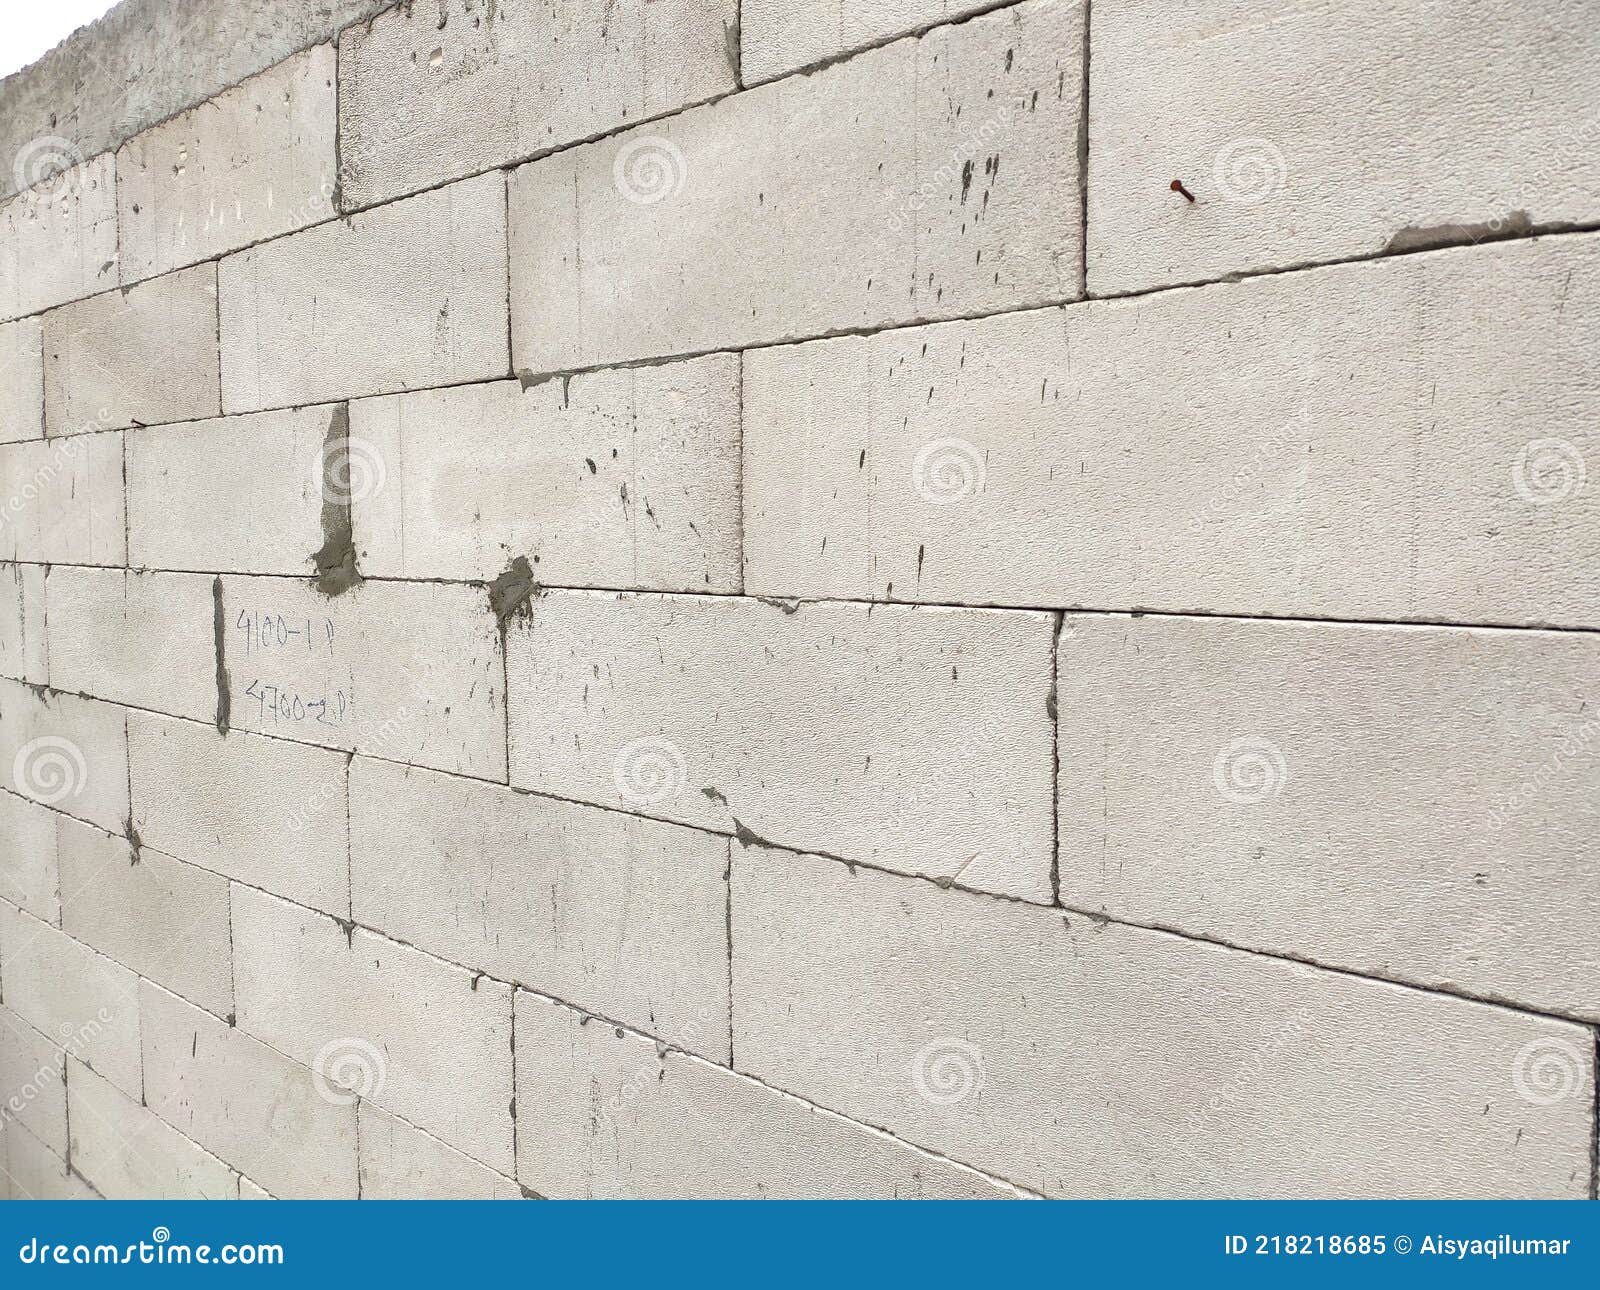 Autoclaved Aerated Concrete Block Or Known As AAC Block Used At The